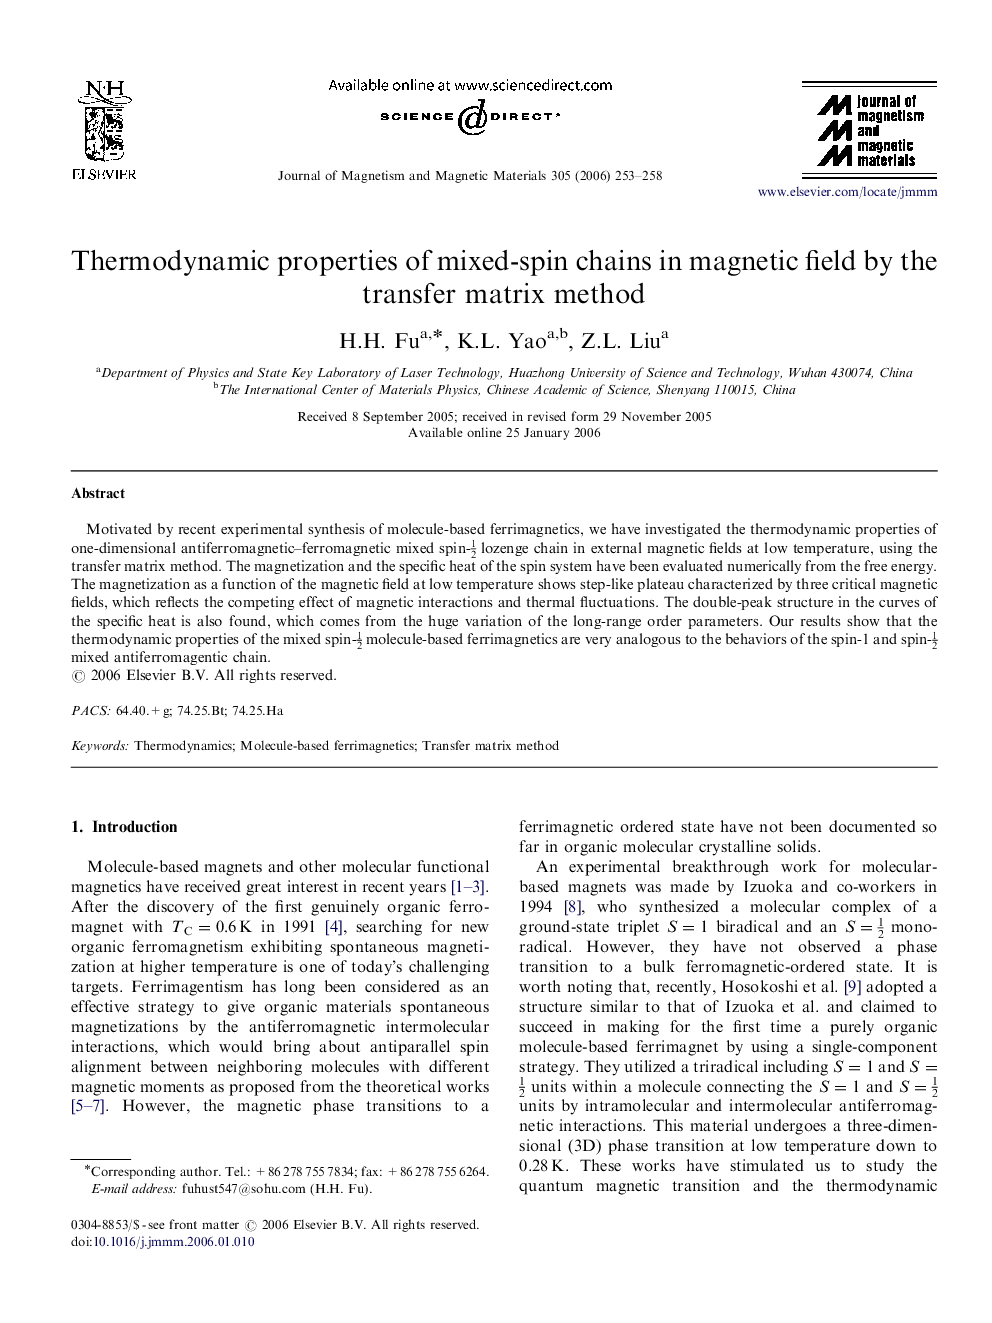 Thermodynamic properties of mixed-spin chains in magnetic field by the transfer matrix method